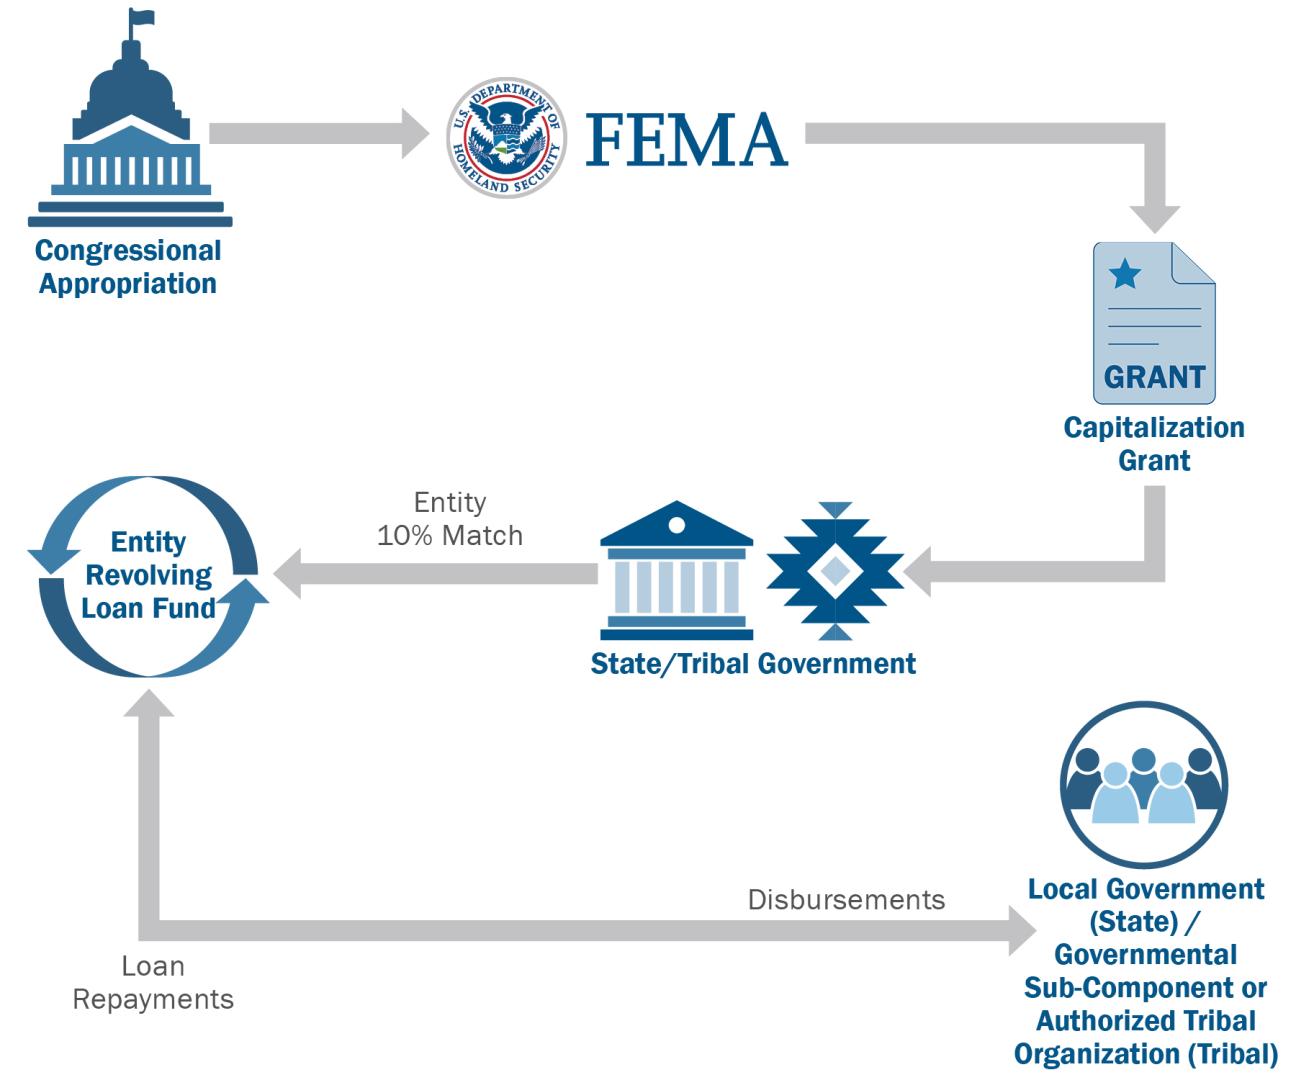 This is a graphic that shows FEMA receives Safeguarding Tomorrow RLF Program funding through congressional appropriation, which goes to a State/Tribal Government in the form of a Capitalization Grant and then to an Entity Revolving Loan Fund. The funding gets disbursed to a Local Government/Governmental Subcomponent or Authorized Tribal Organization.